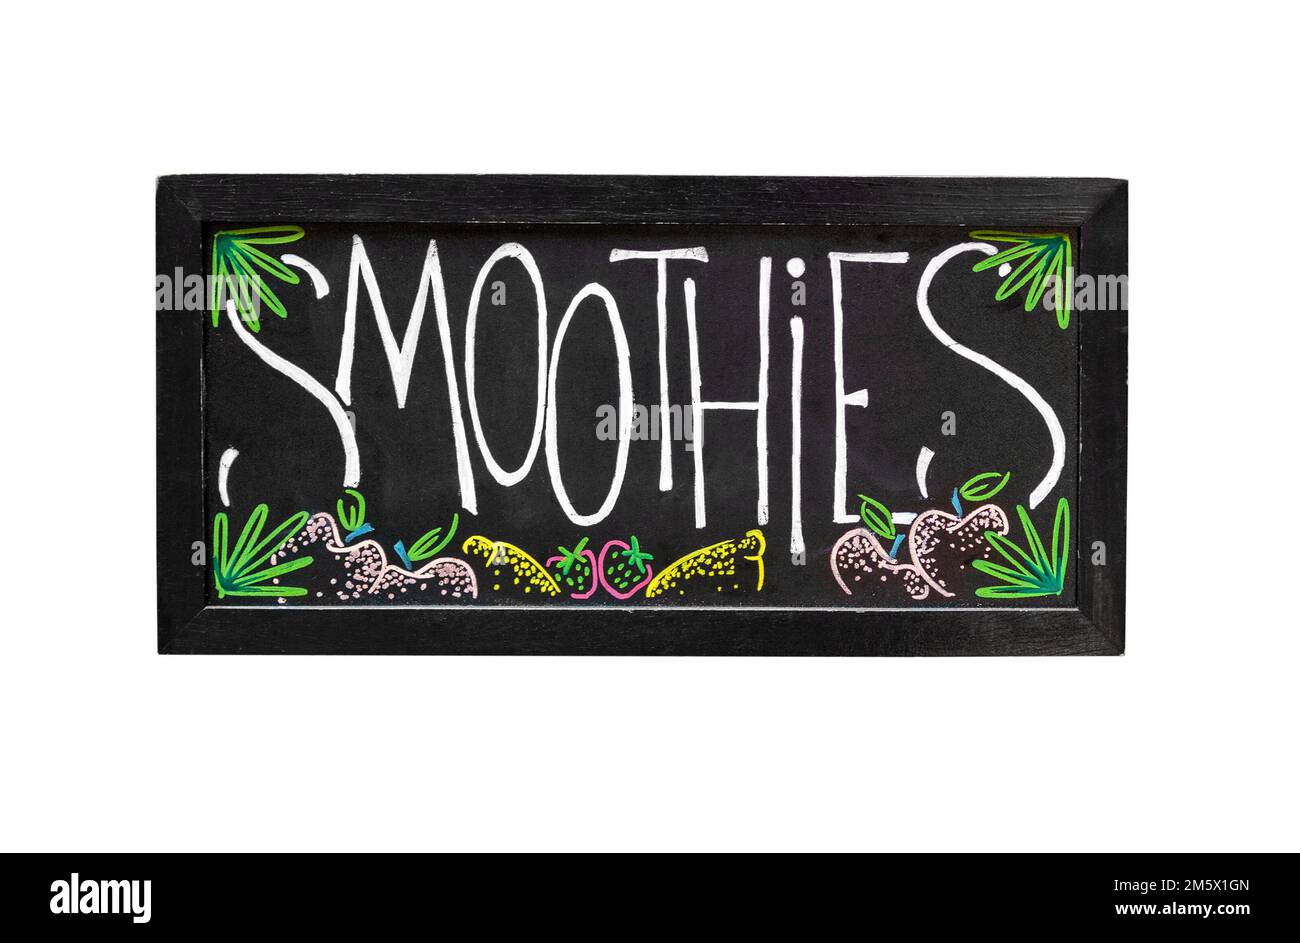 Smoothies available chalkboard sign isolated on white background, healthy drink invitation on blackboard Stock Photo